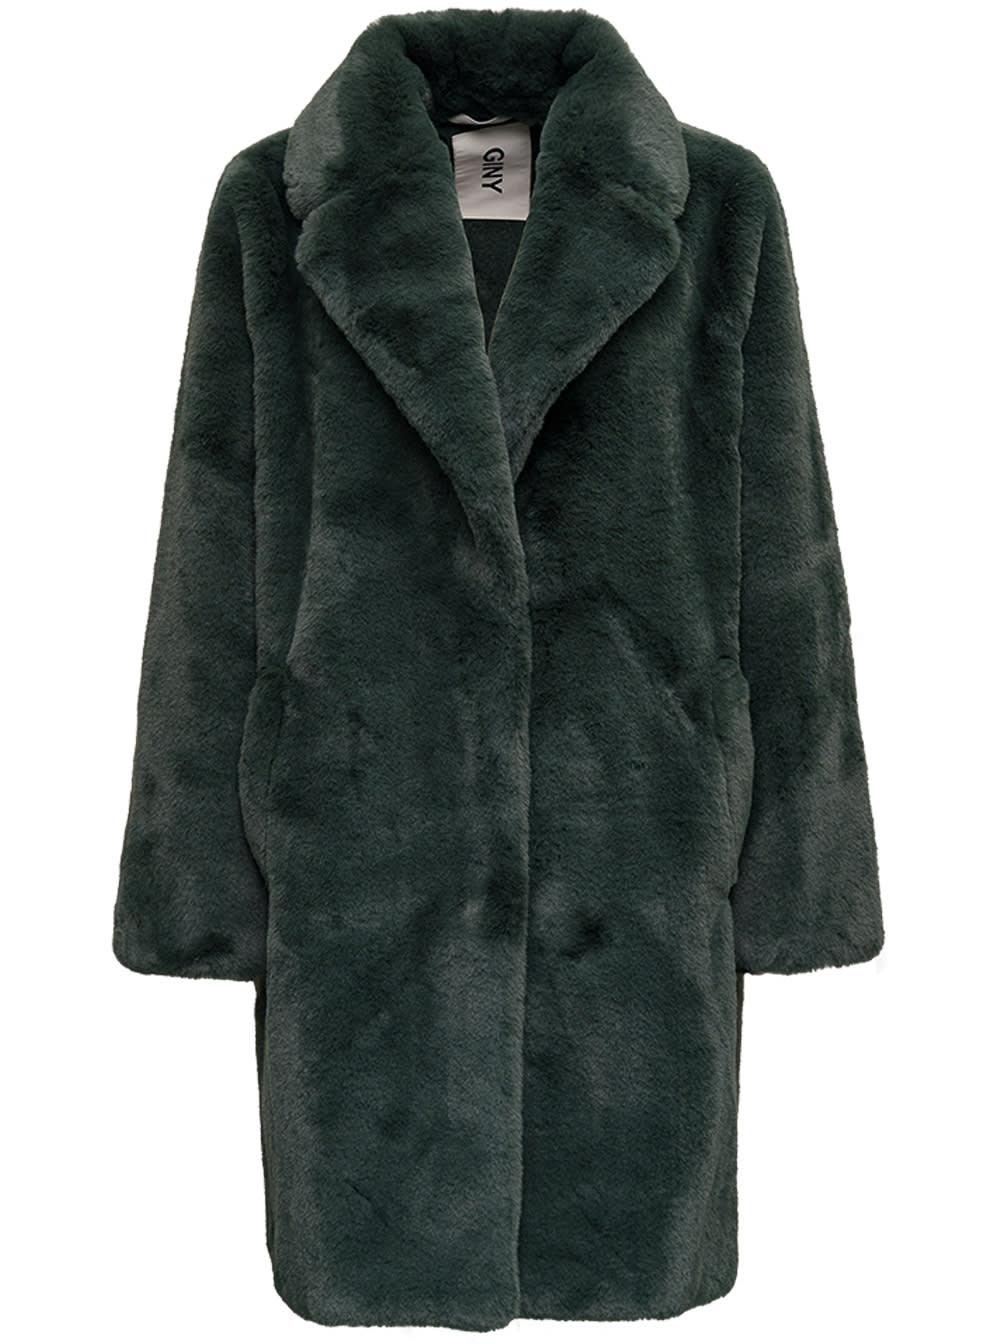 GINY Green Ecological Long Fur